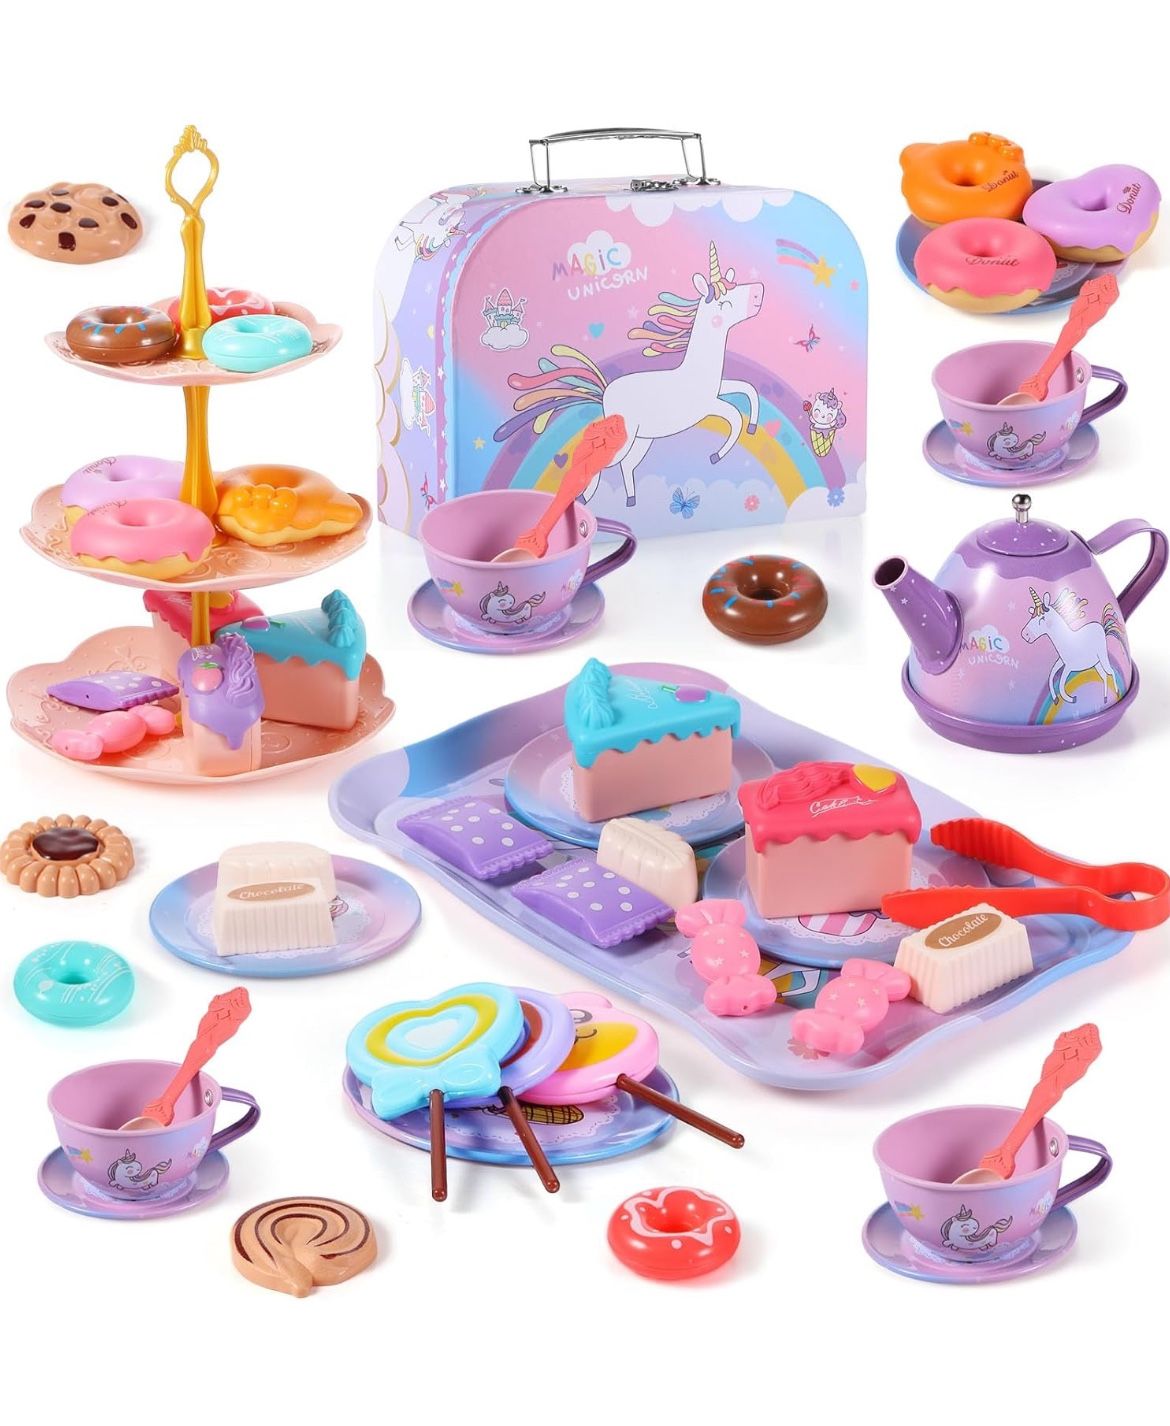 Kids Tea Party Set for 3 Year Old Girls Princess Tea Pretend Toy Kids Kitchen Pretend Play Tea Party Set Toys with Dessert Doughnut Carrying Case for 